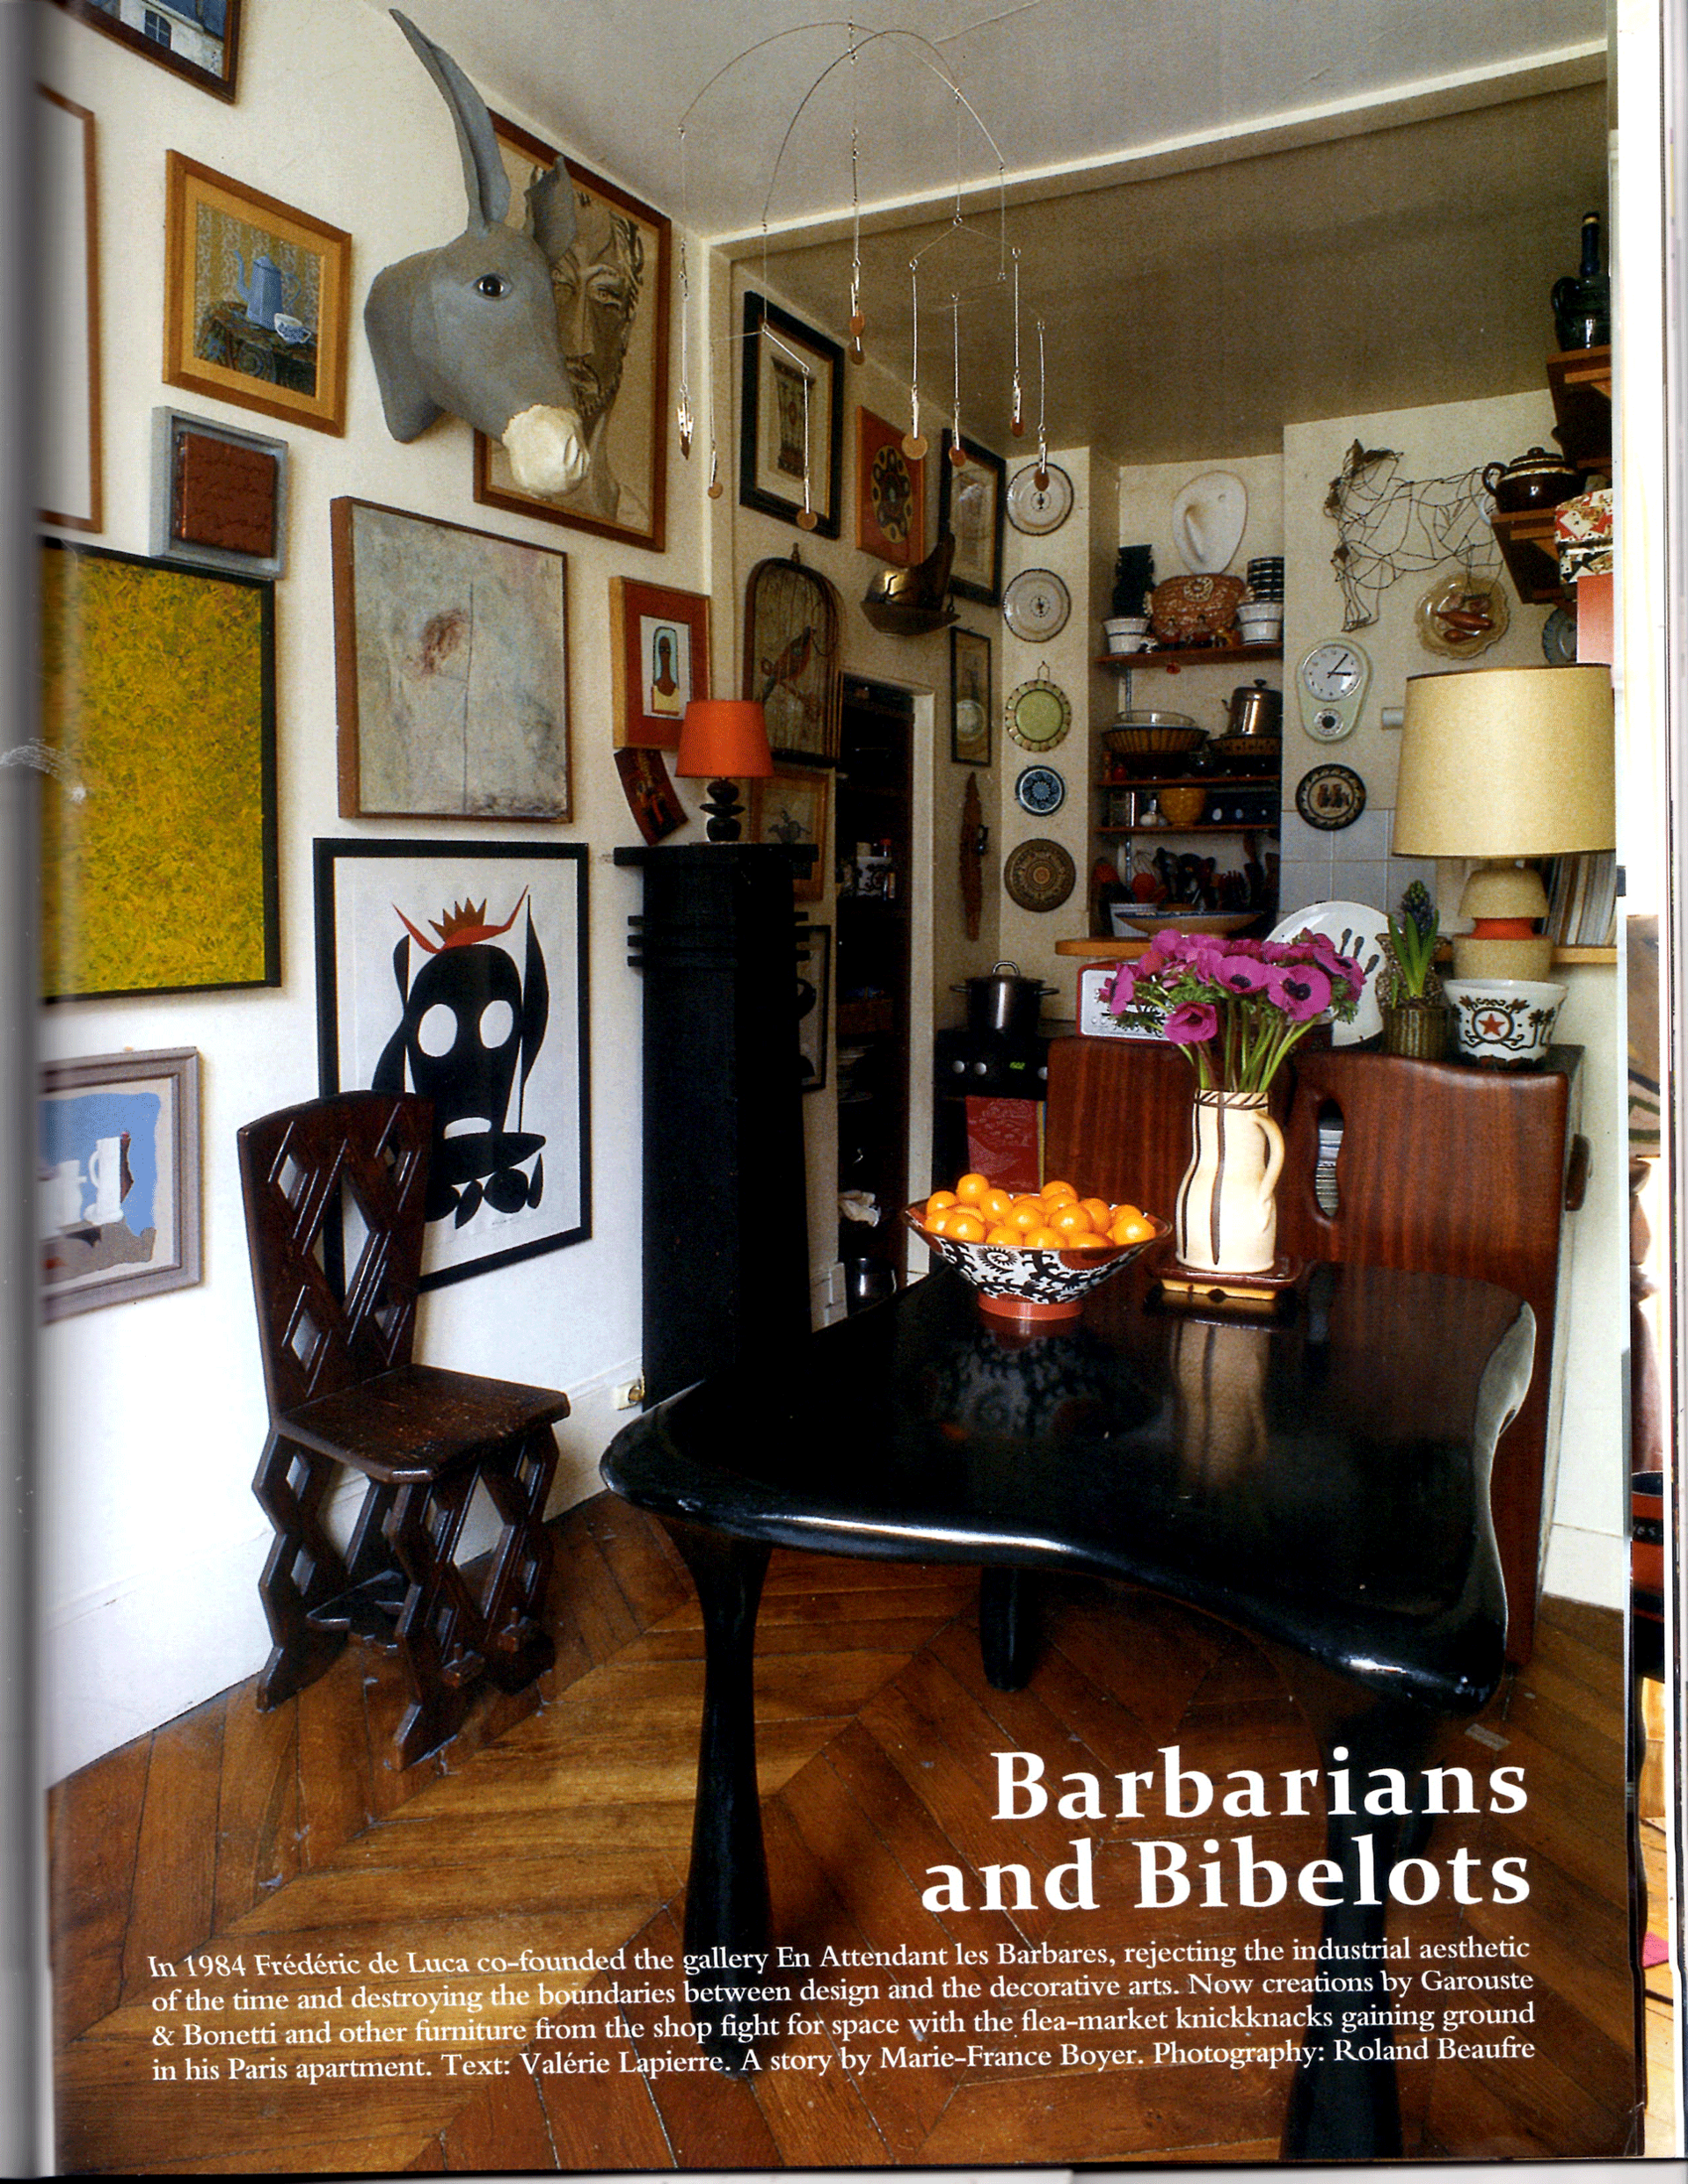 The World of Interiors, September 2011 - Jacques Jarrige